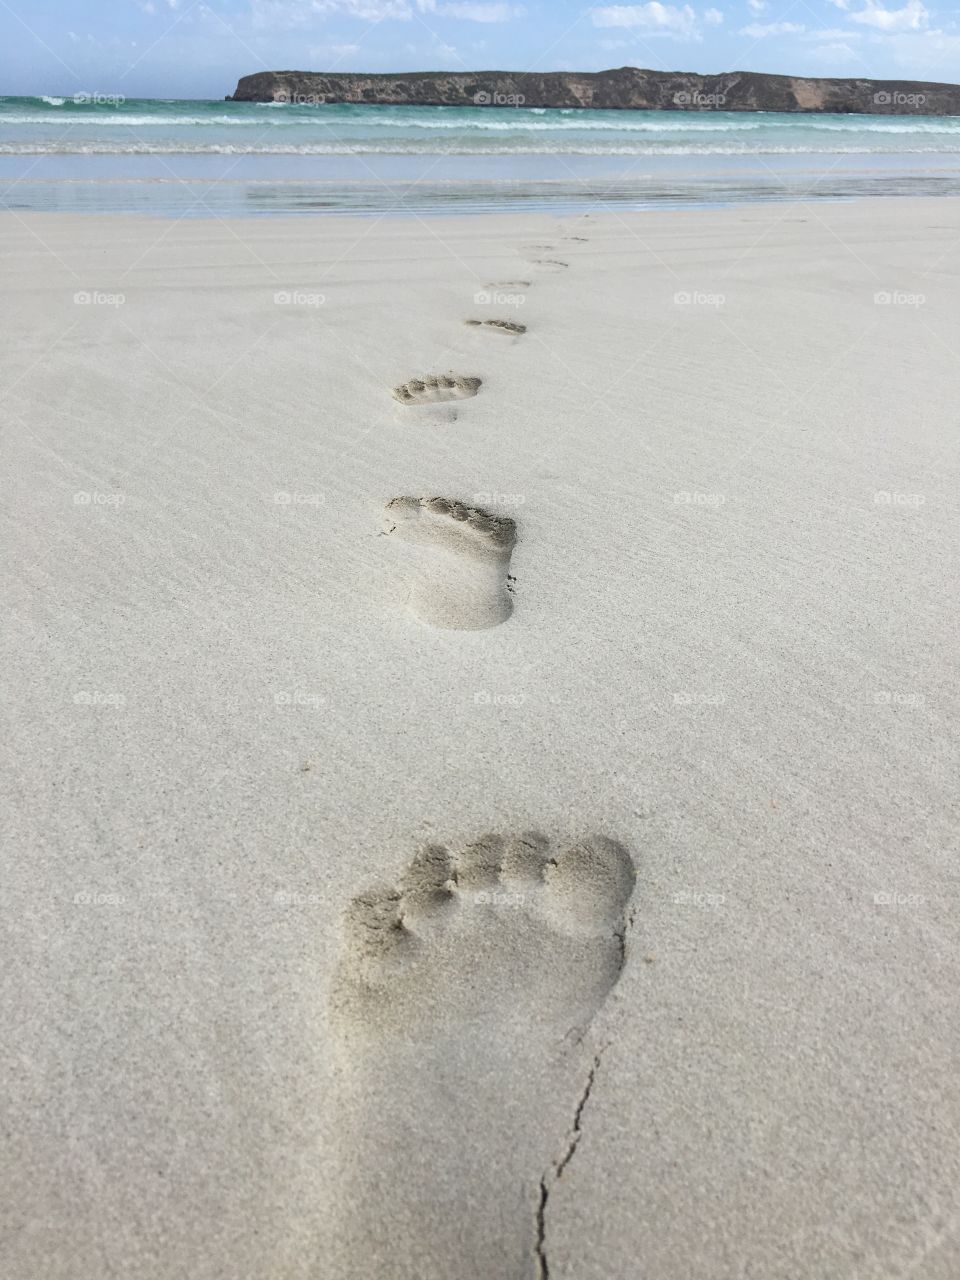 Footprints in the sand on remote beach